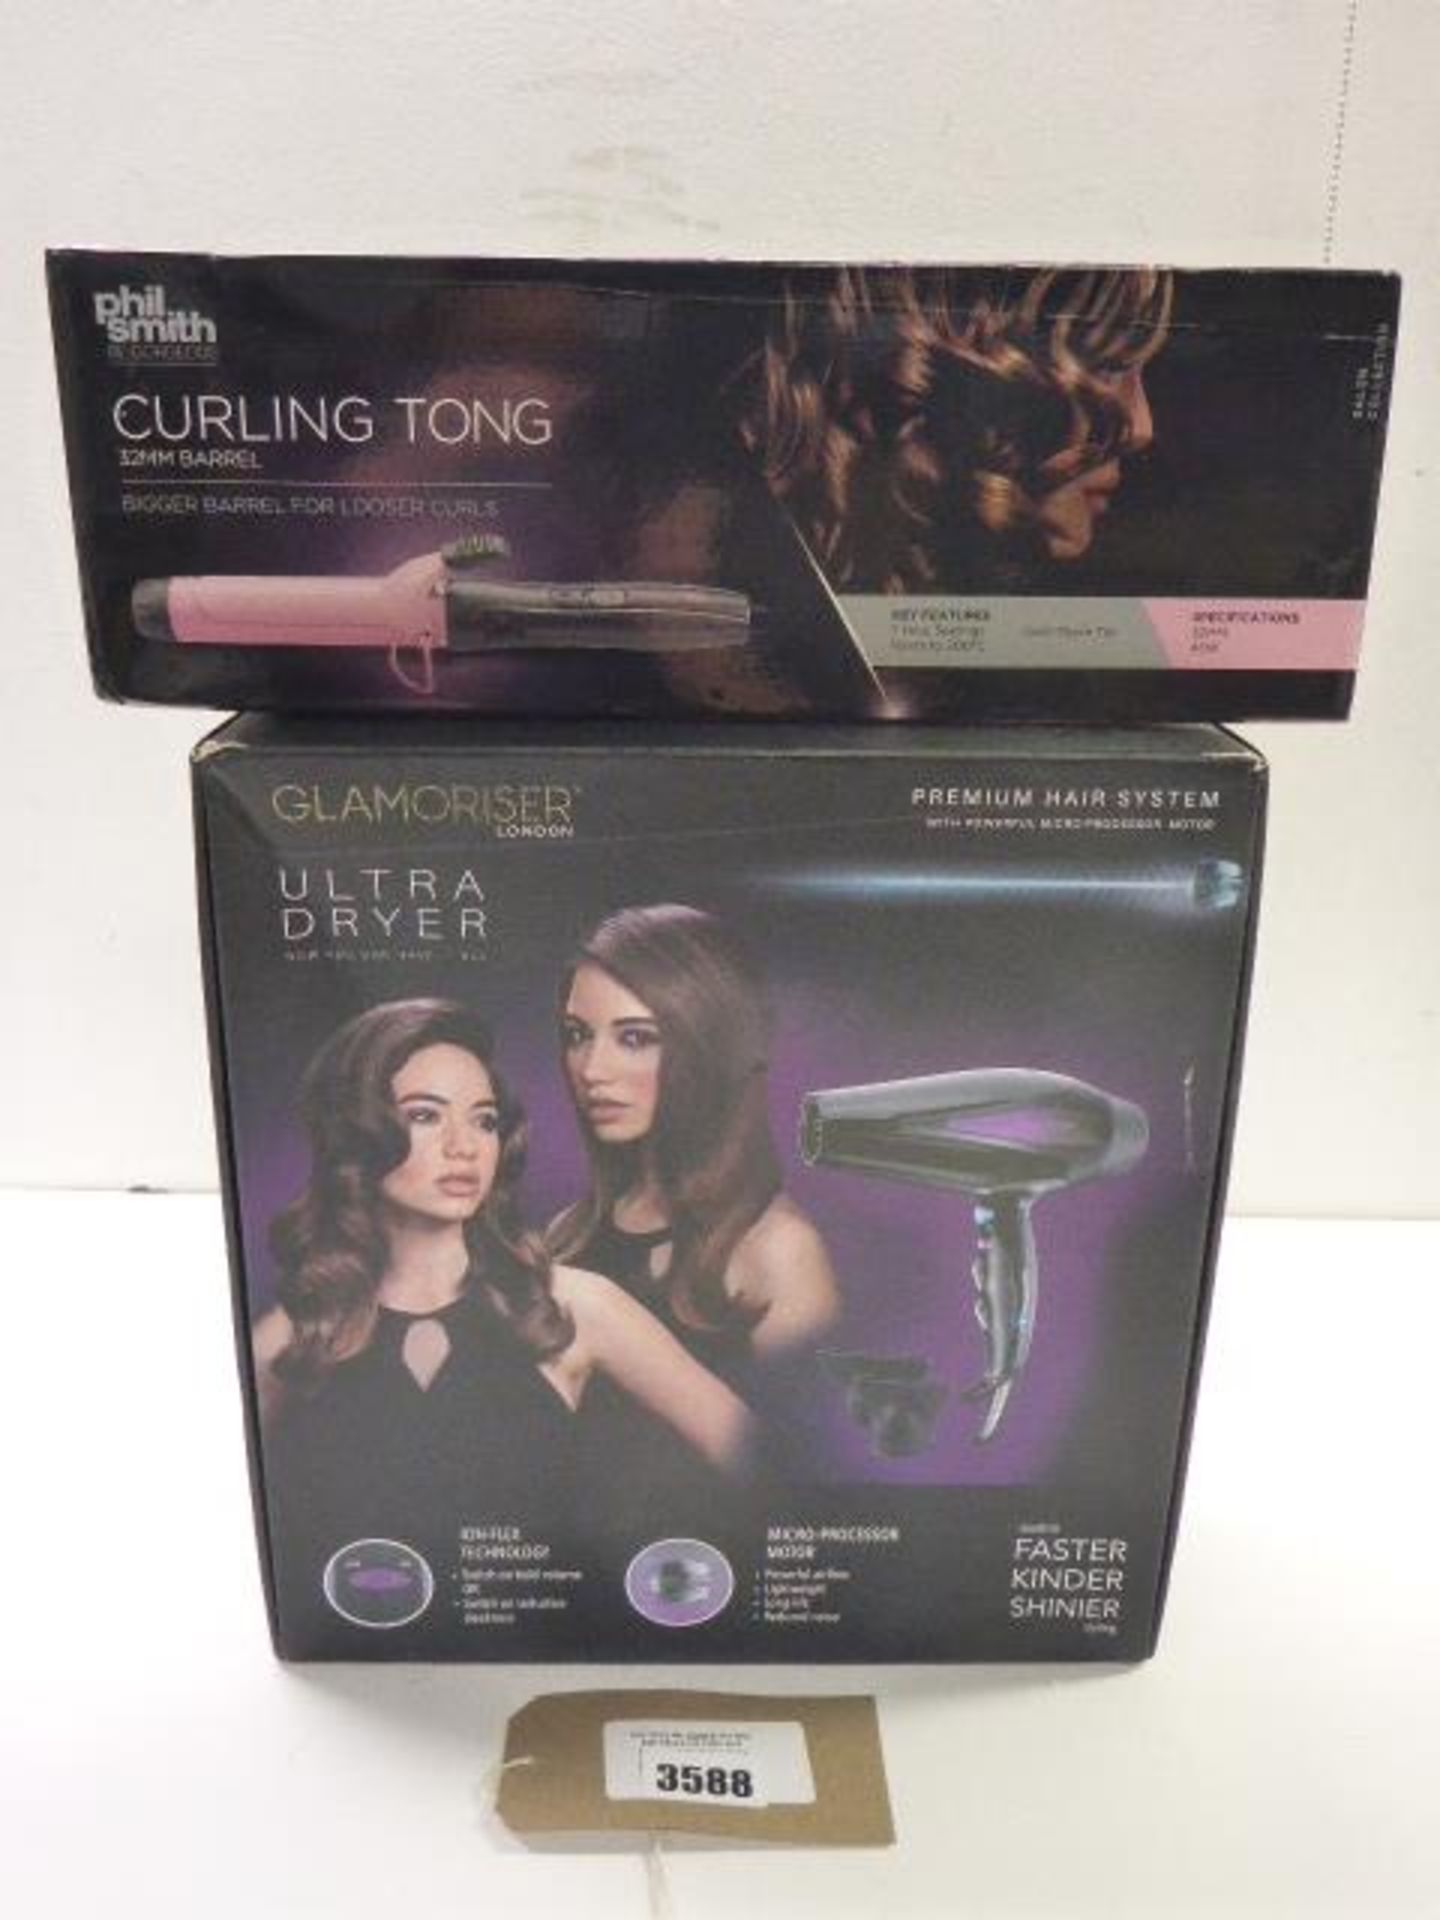 Phil Smith curling tongs and Glamoriser Ultra dry hair dryer